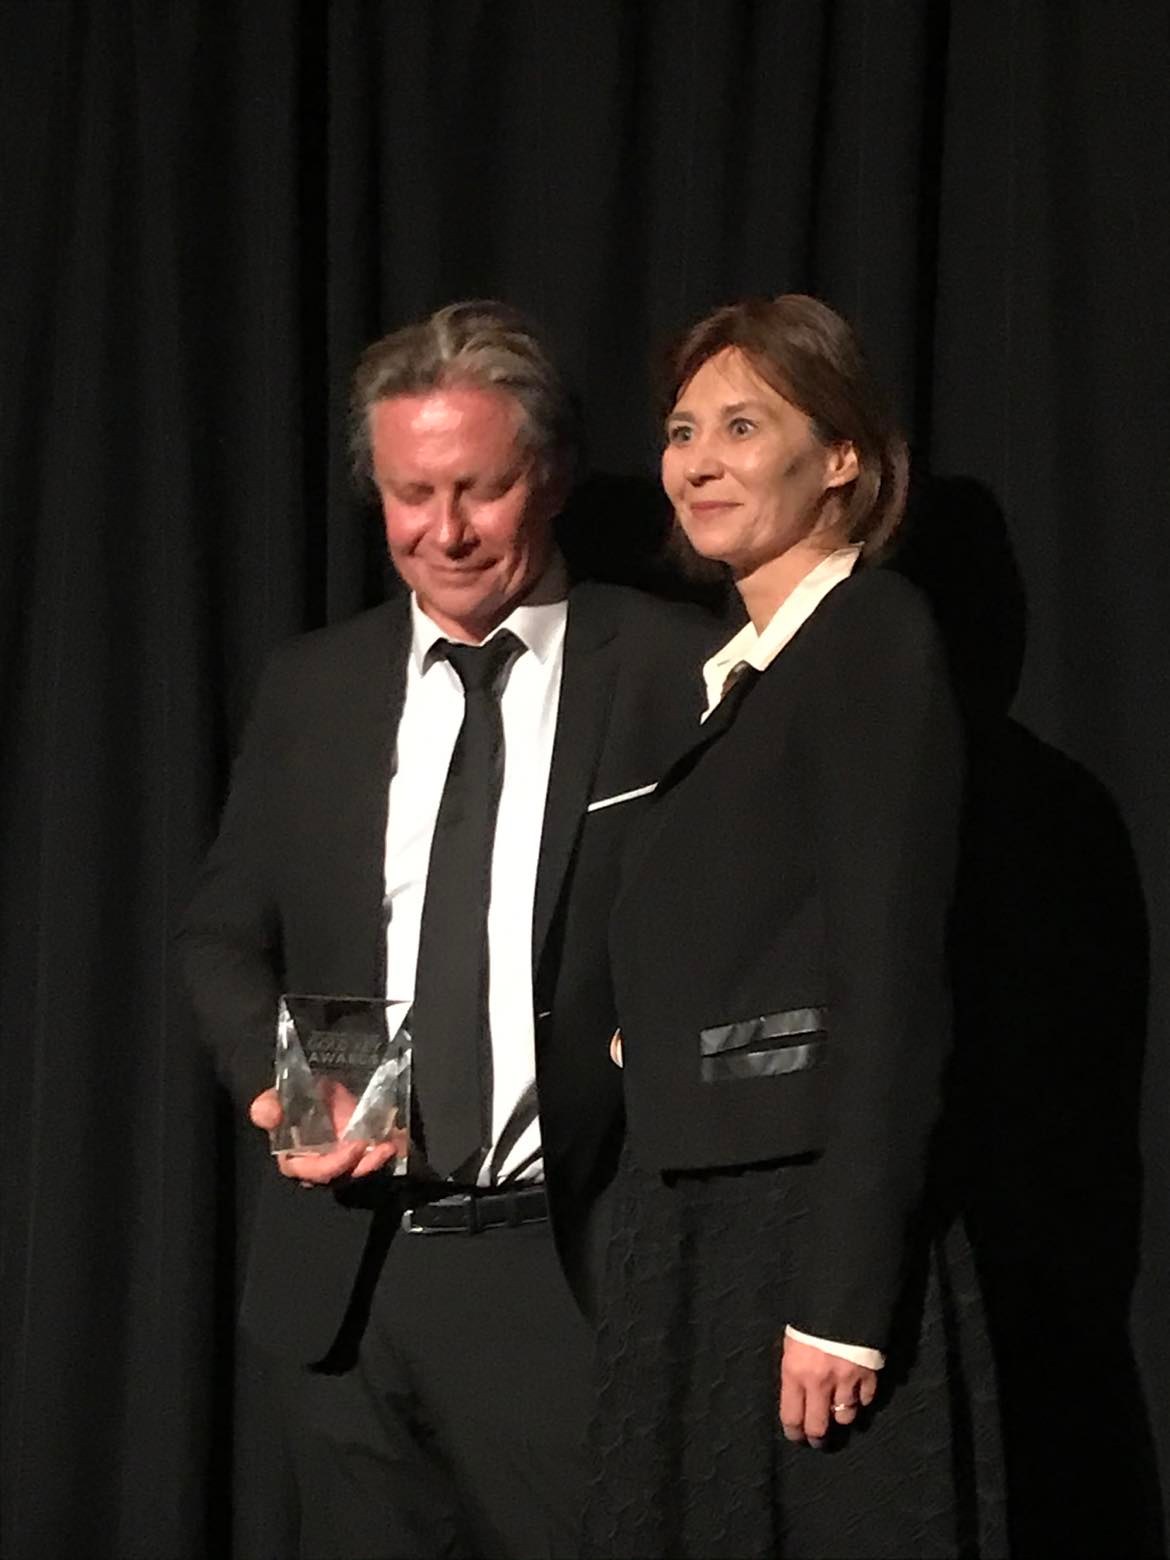 New York Awards - Best Luxury Hotel at the 2019 Gold Key Awards for the InterContinental Lyon Hôtel-Dieu jean-philippe nuel accompanied by sandy depres stevens